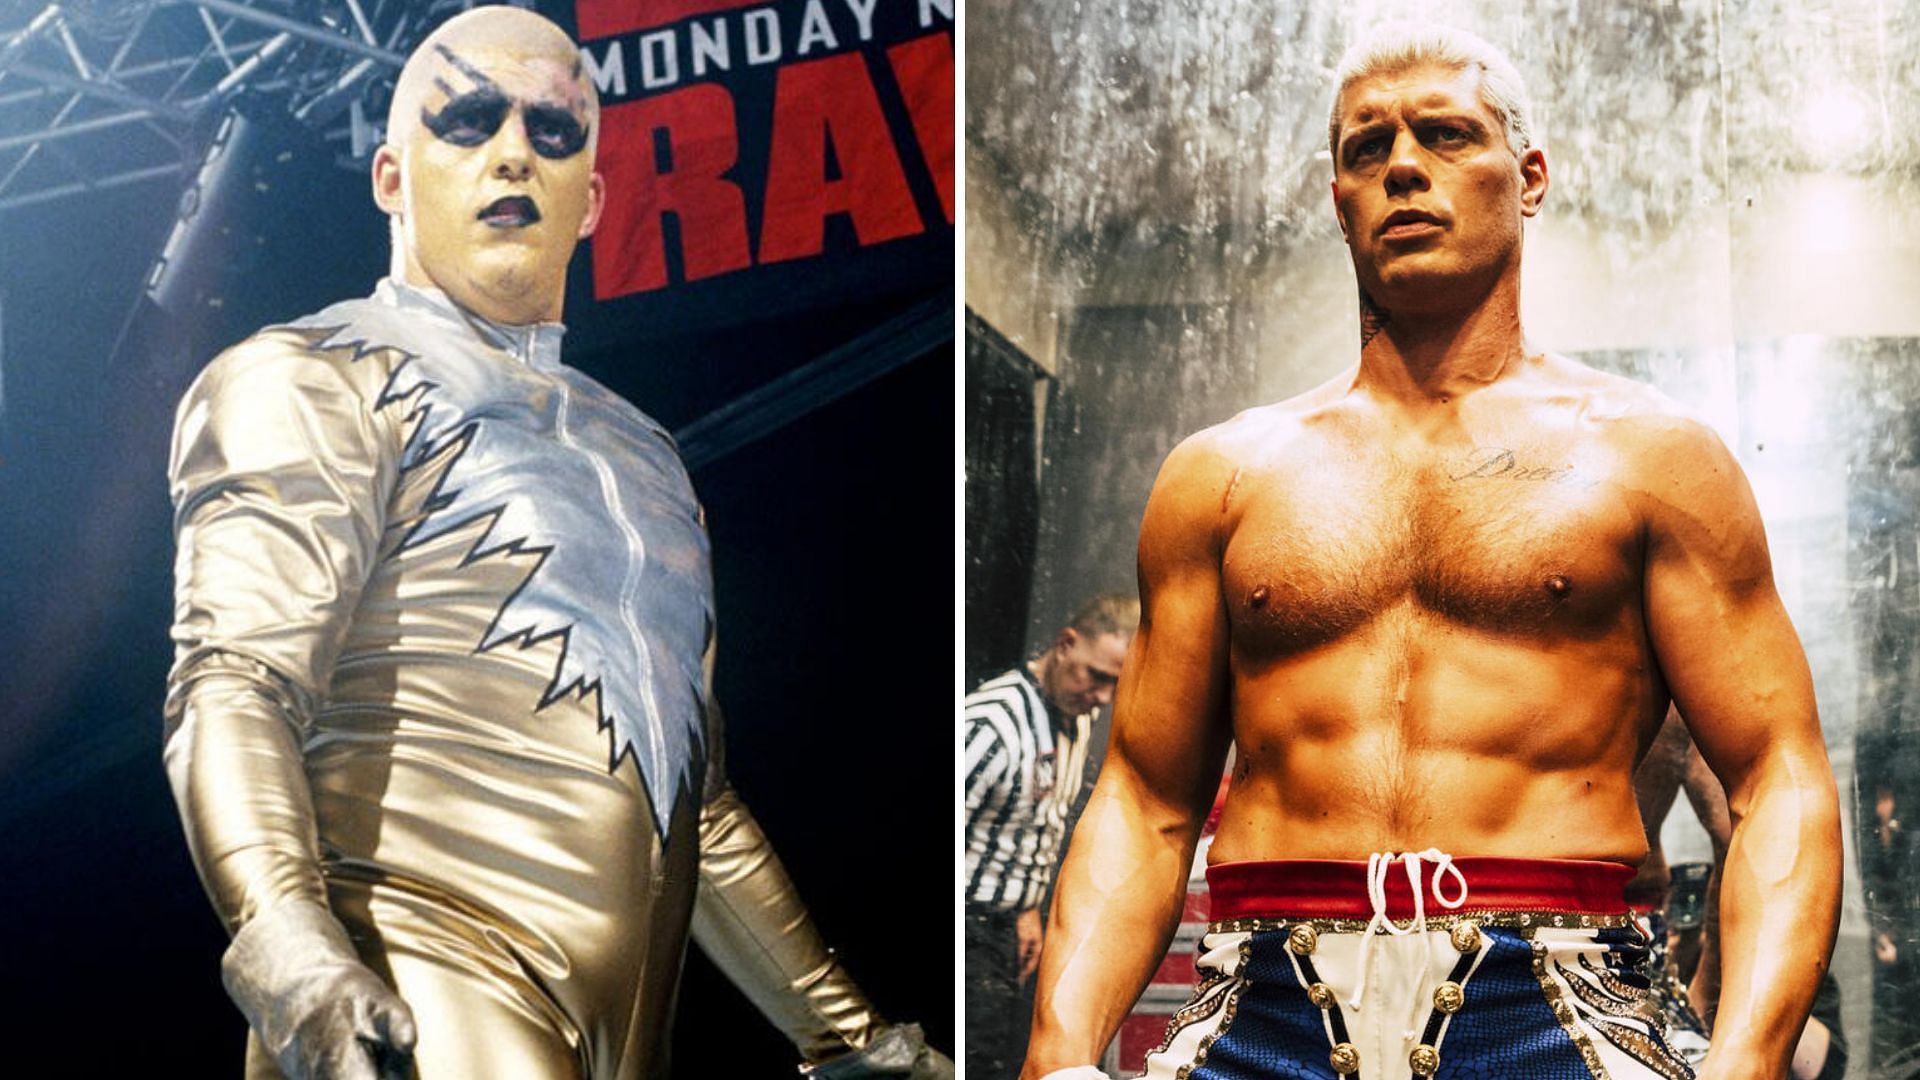 Dustin Rhodes and Cody Rhodes; Two of the best in the business